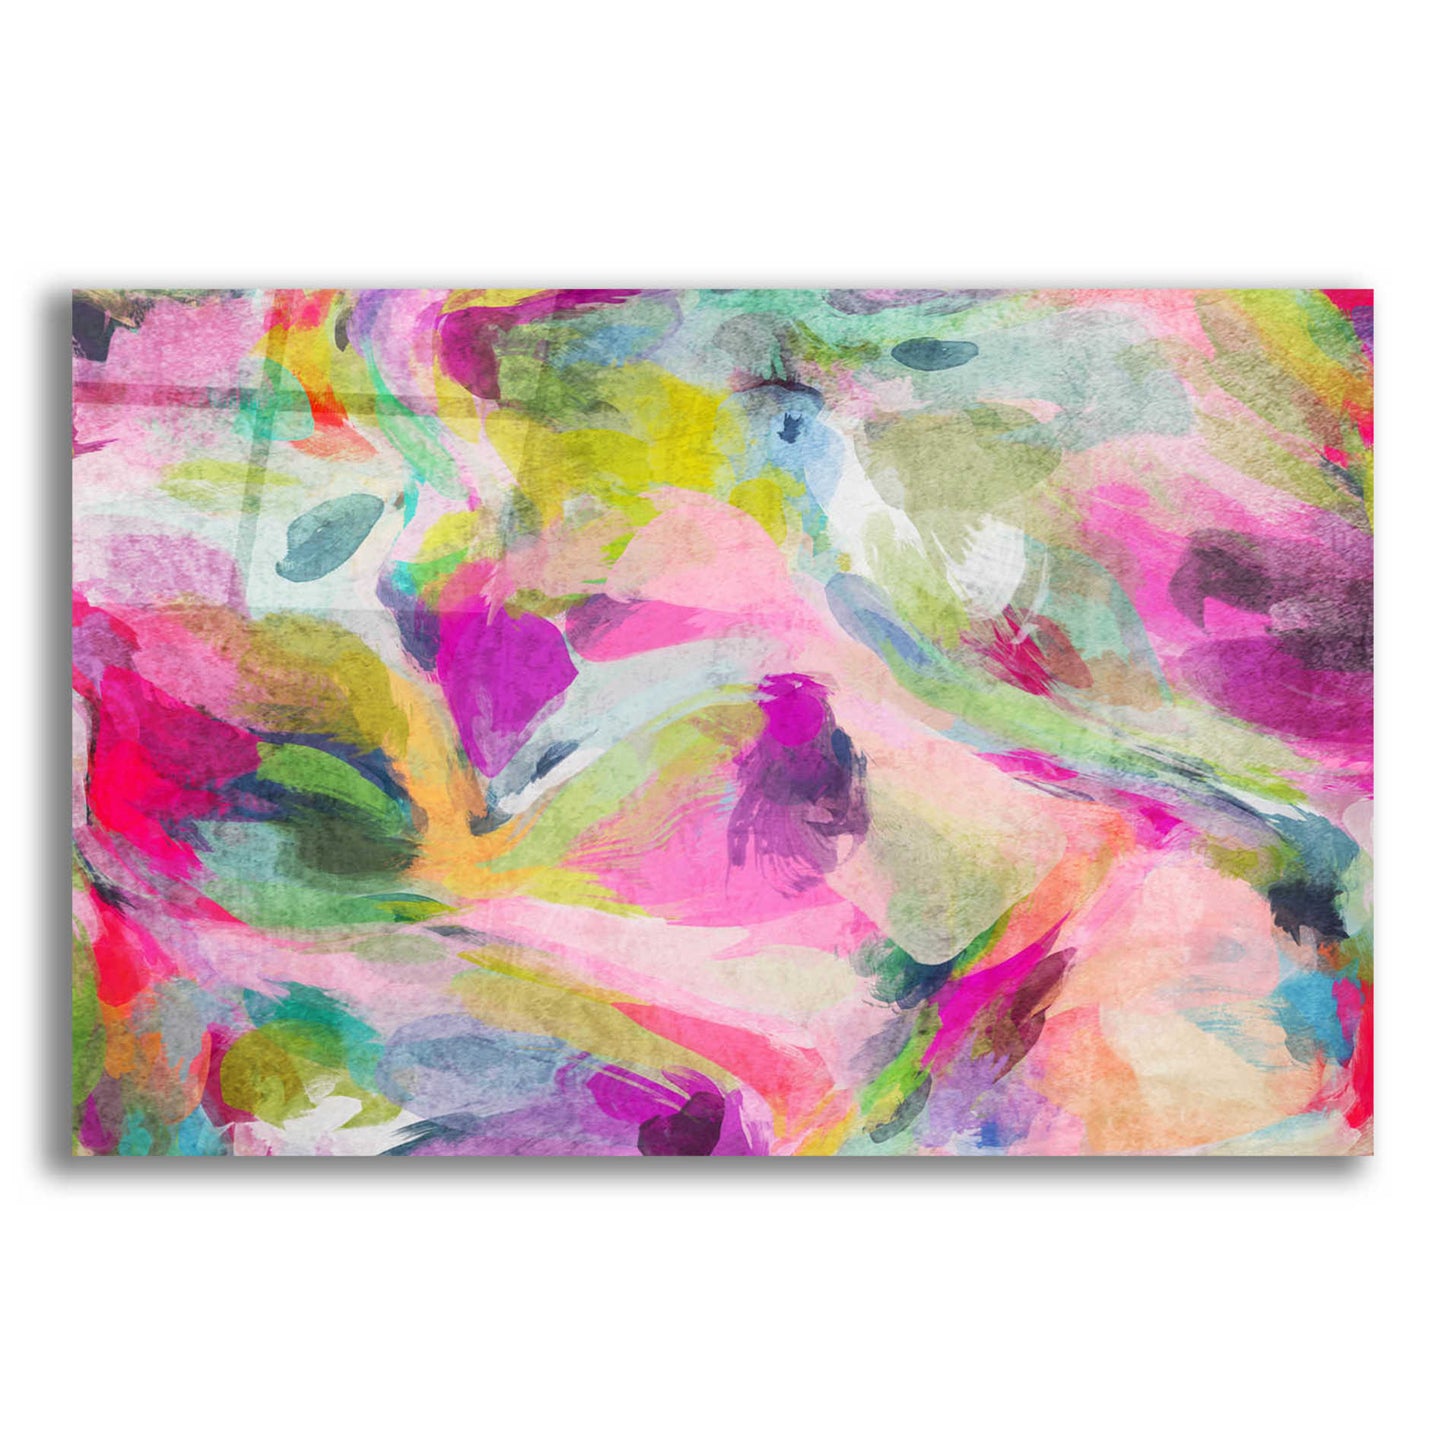 Epic Art 'Abstract Colorful Flows 3' by Irena Orlov Acrylic Glass Wall Art